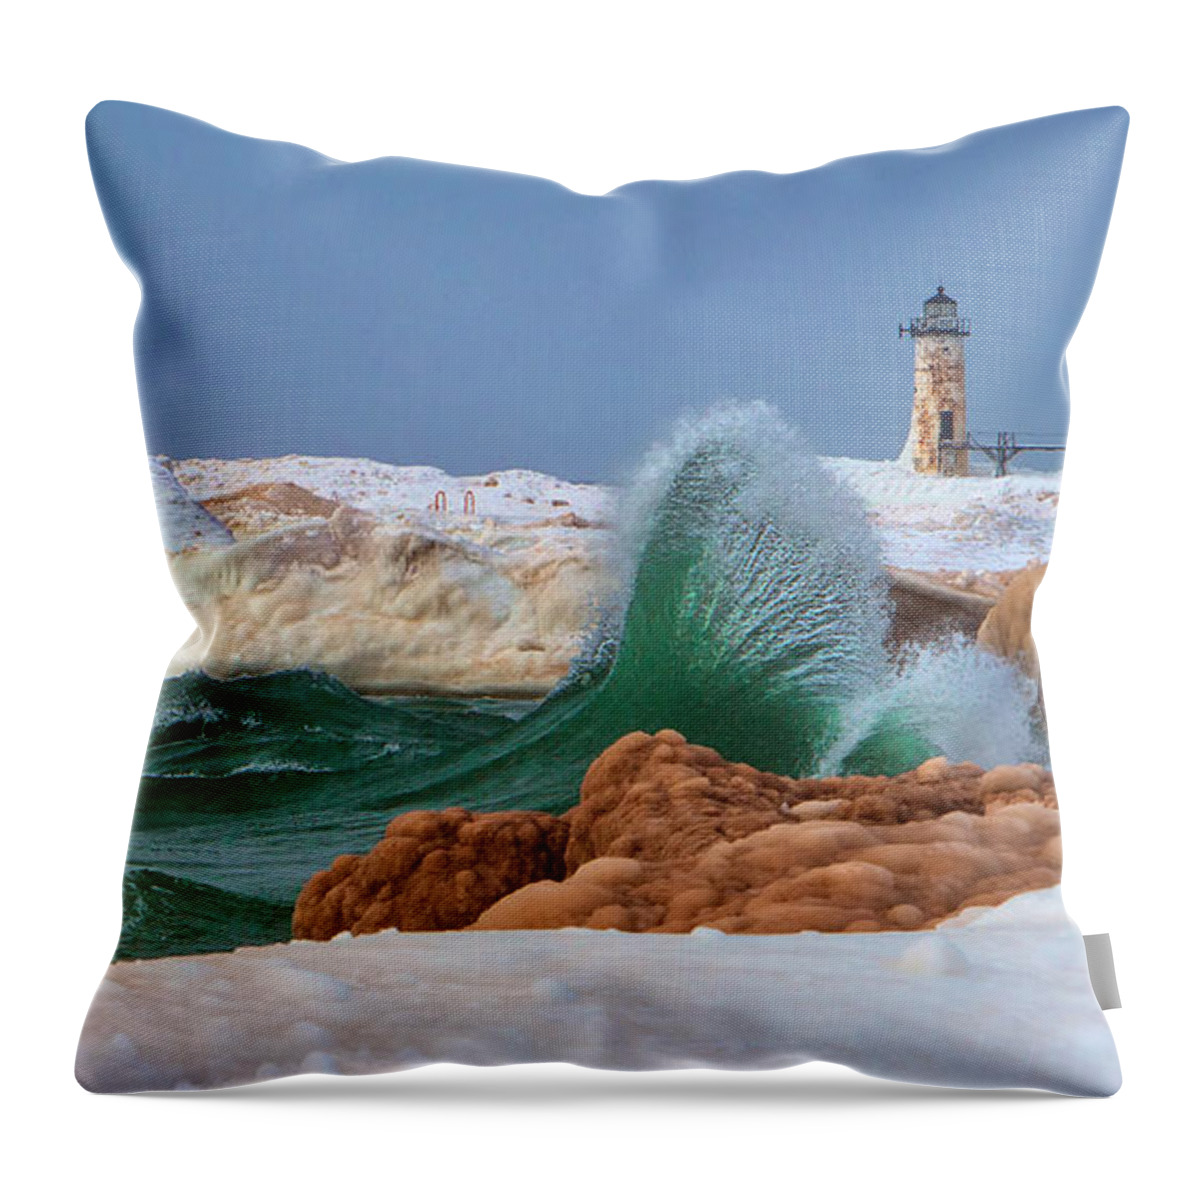 Manistee Photography Throw Pillow featuring the photograph The Mermaid Tail and the Manistee Lighthouse Landscape by Steve White